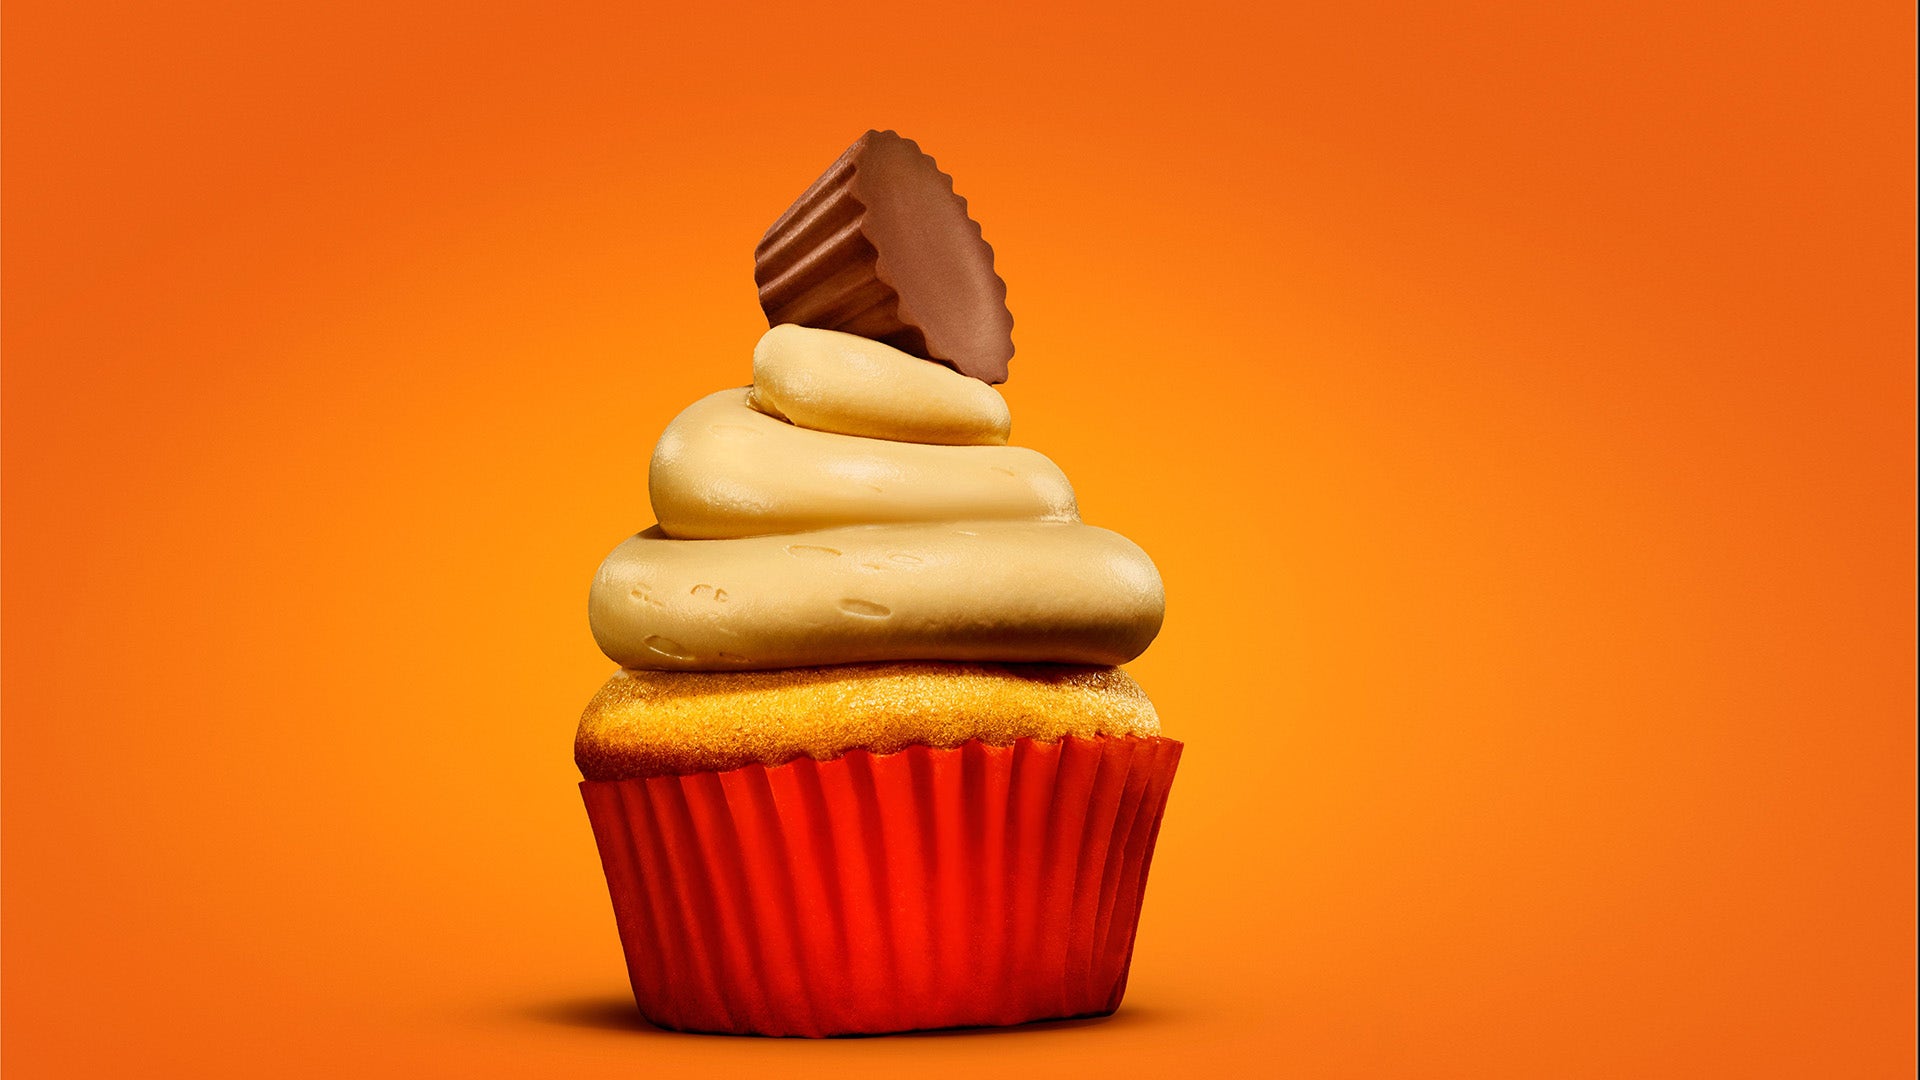 Peanut Butter Cup Mini Cupcakes With Peanut Butter Icing